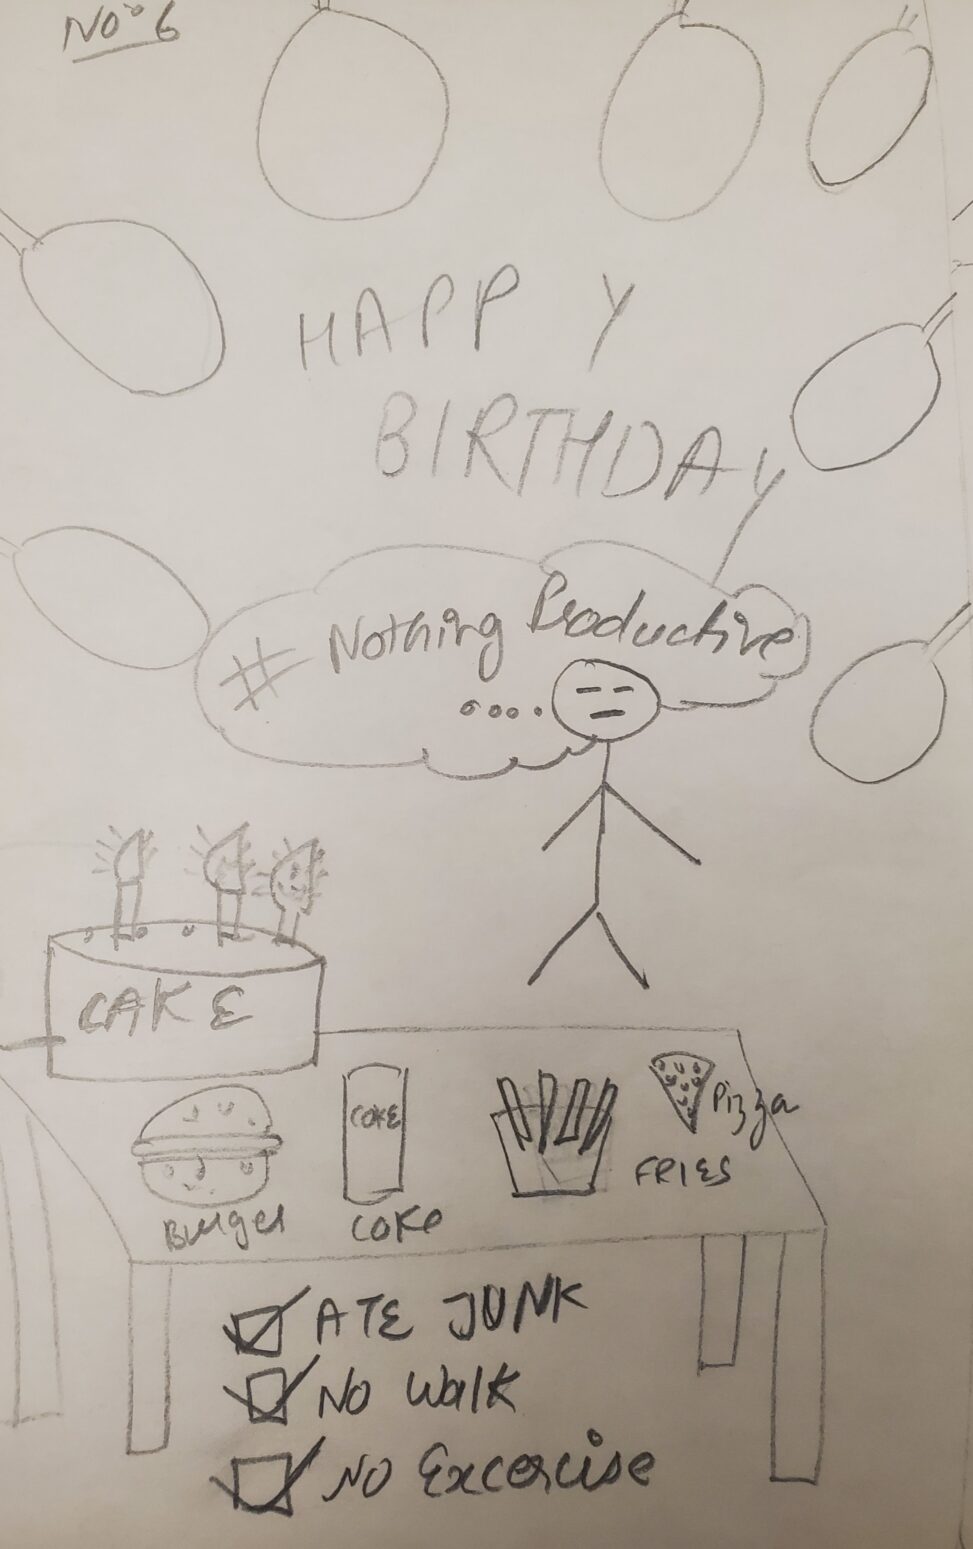 In this picture There is stick figure which is depicting me. Enjoying birthday party and there is table with cake and balloons everywhere and also to do list in which there are non productive things are written.